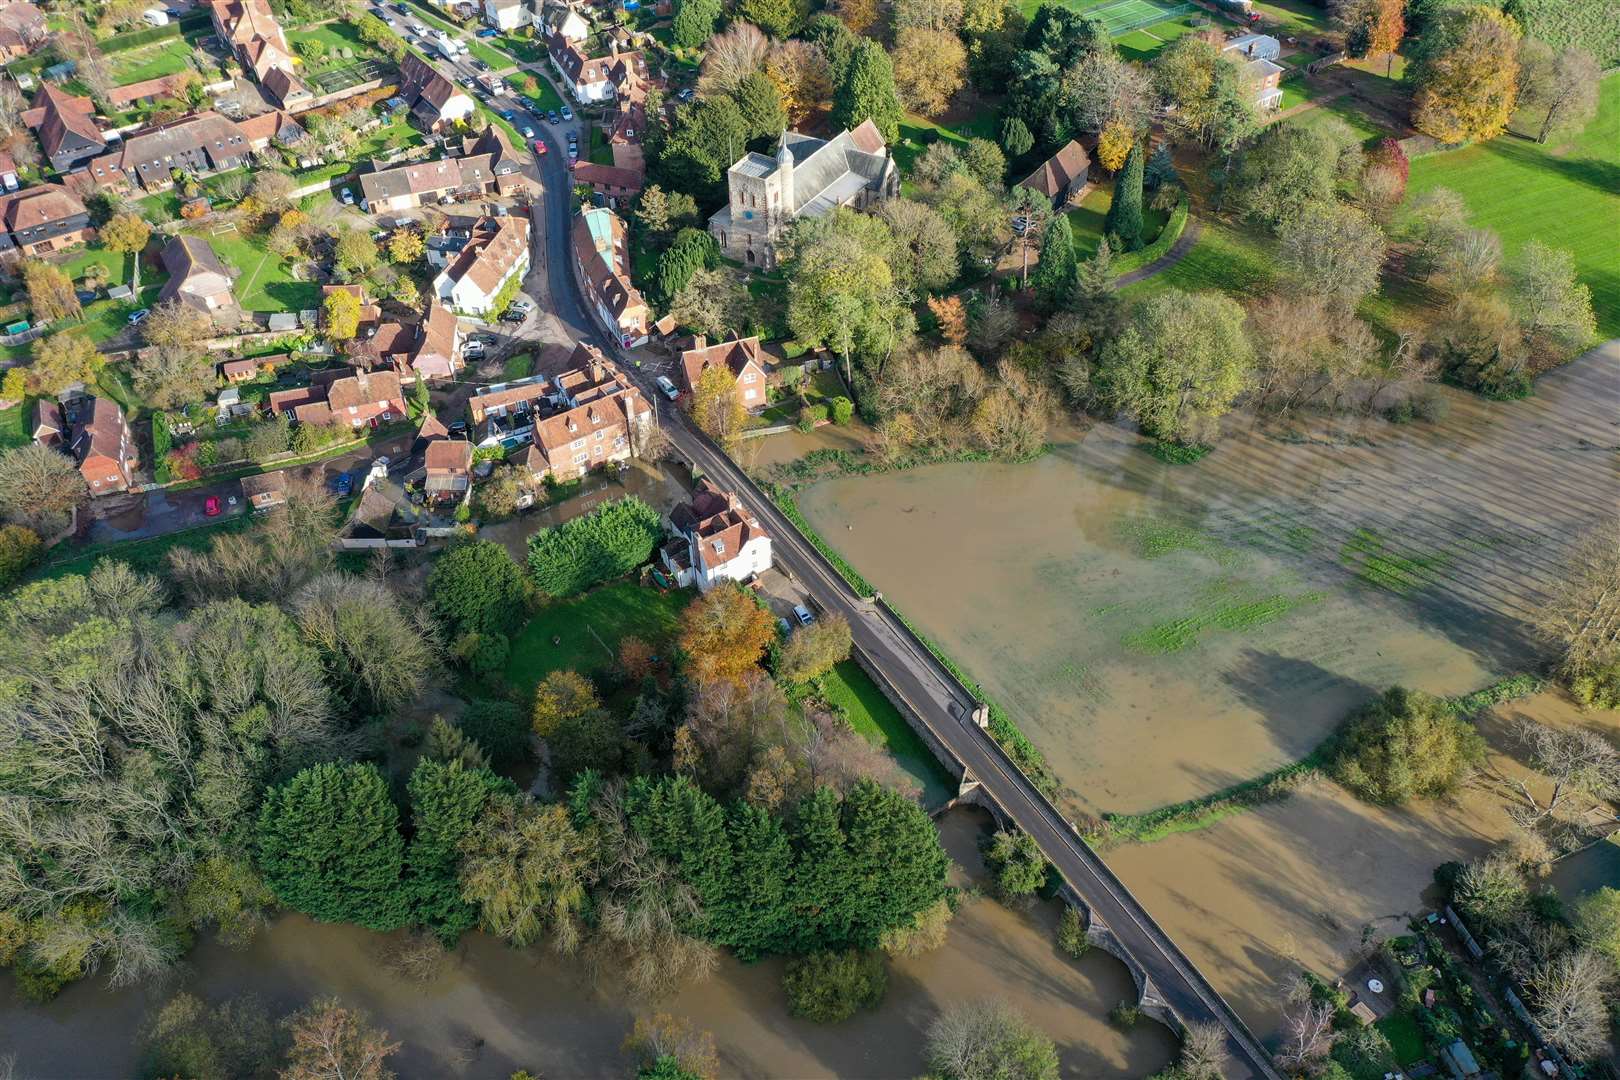 Flooding in Yalding last Friday. Picture: UKNiP